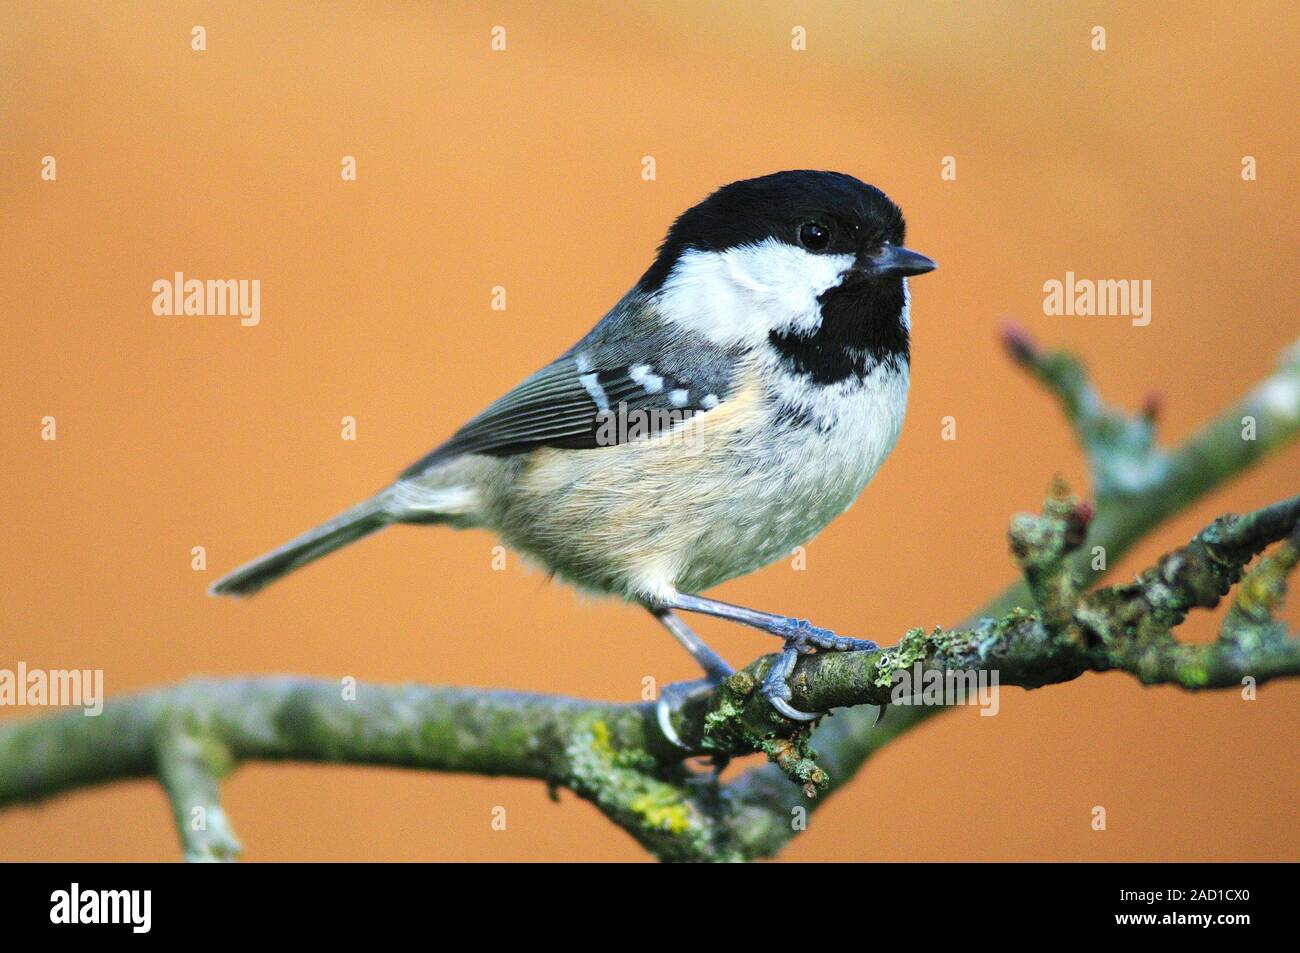 Coal tit (Parus ater) in winter. This bird (also known as Periparus ater) is widespread throughout Europe, Asia and northern Africa. It is around 11 c Stock Photo